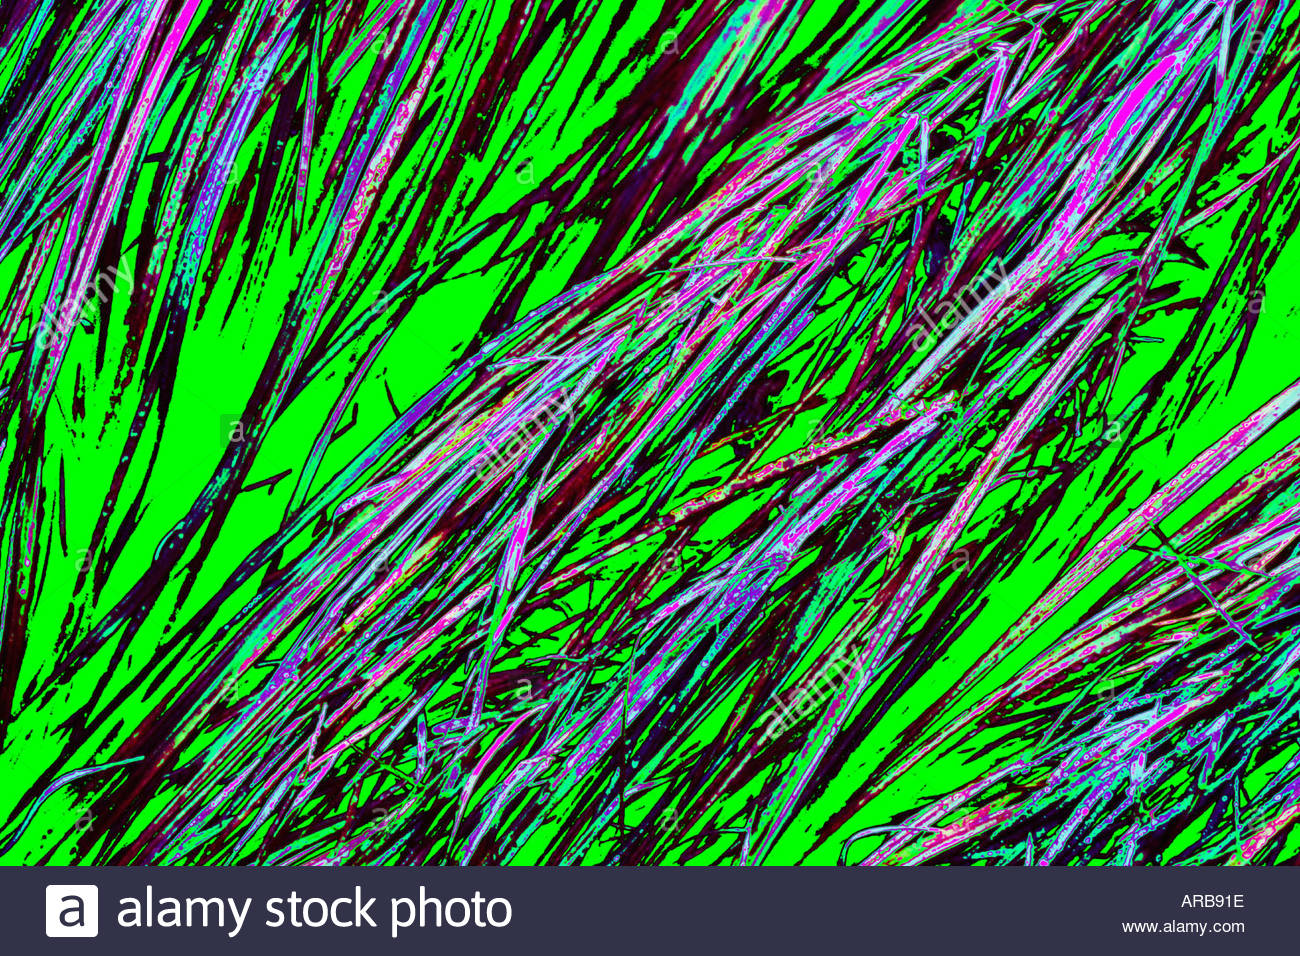 Field Grass abstract Stock Photo